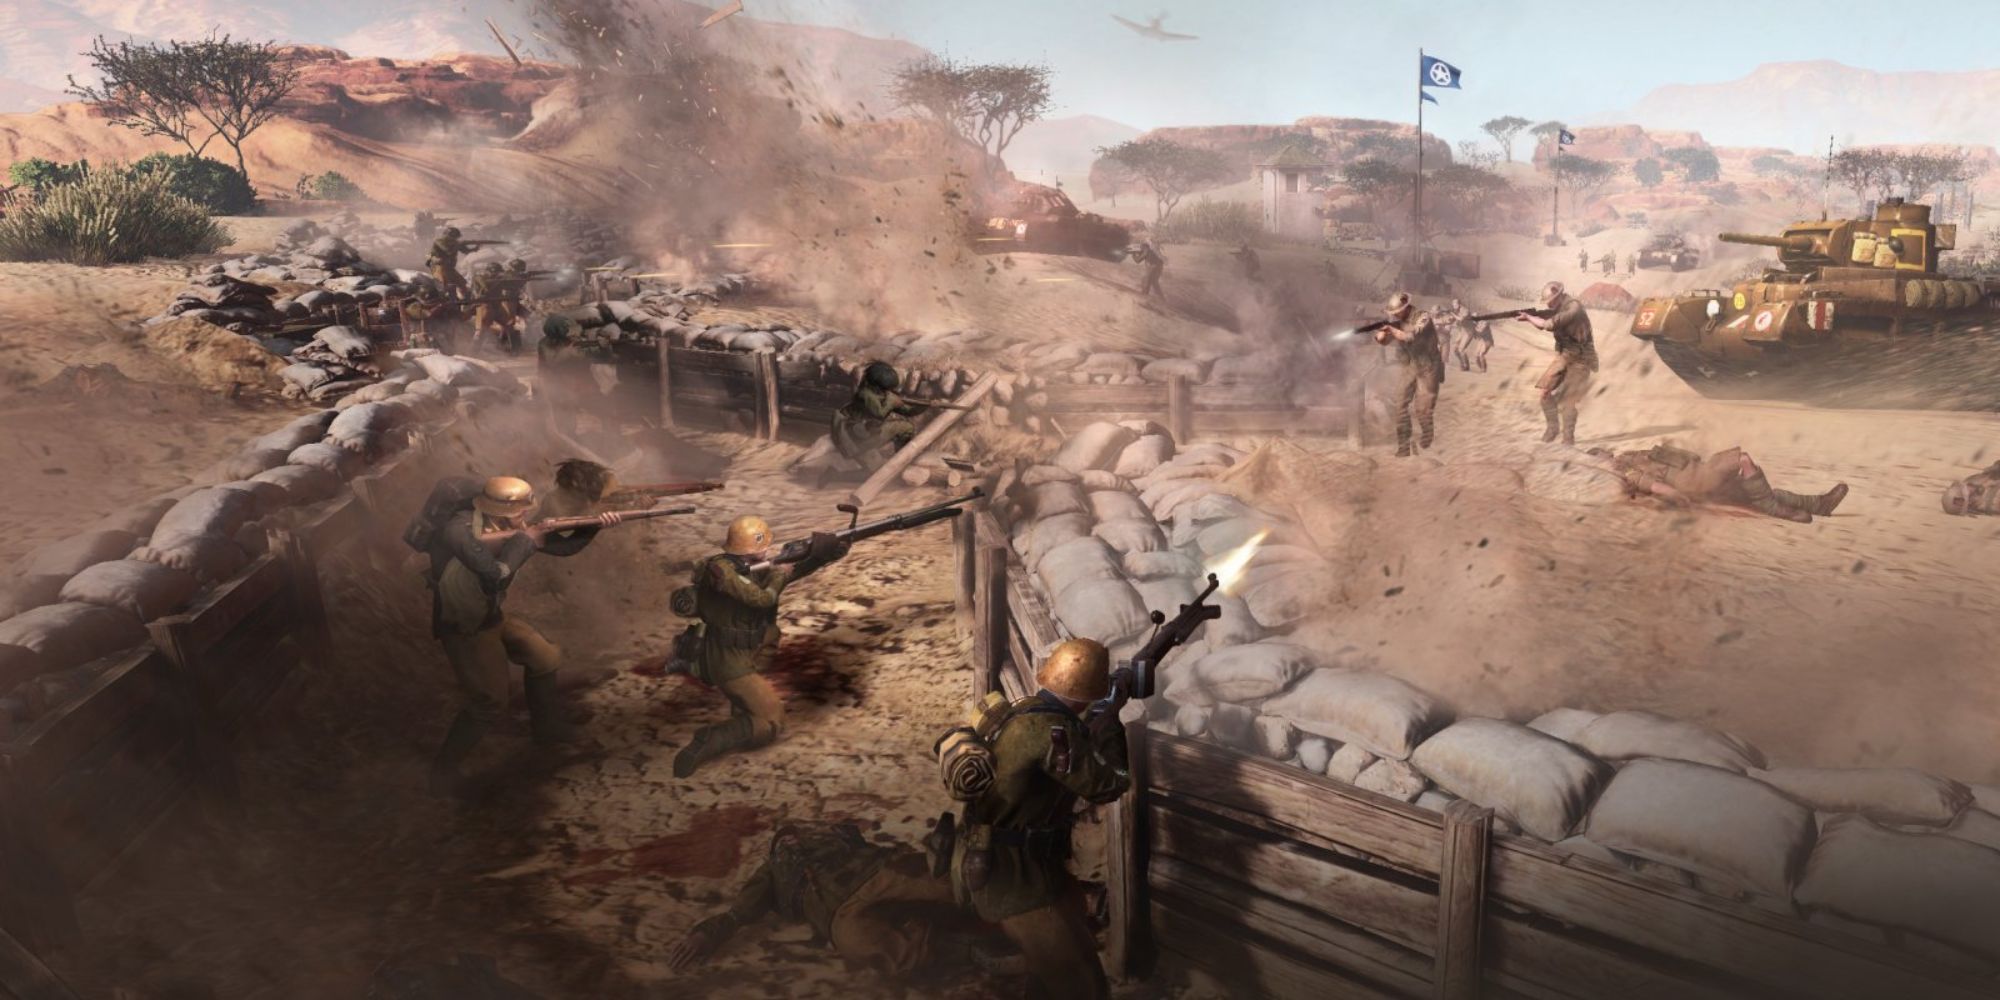 Company of Heroes 3 Mediterranean theater